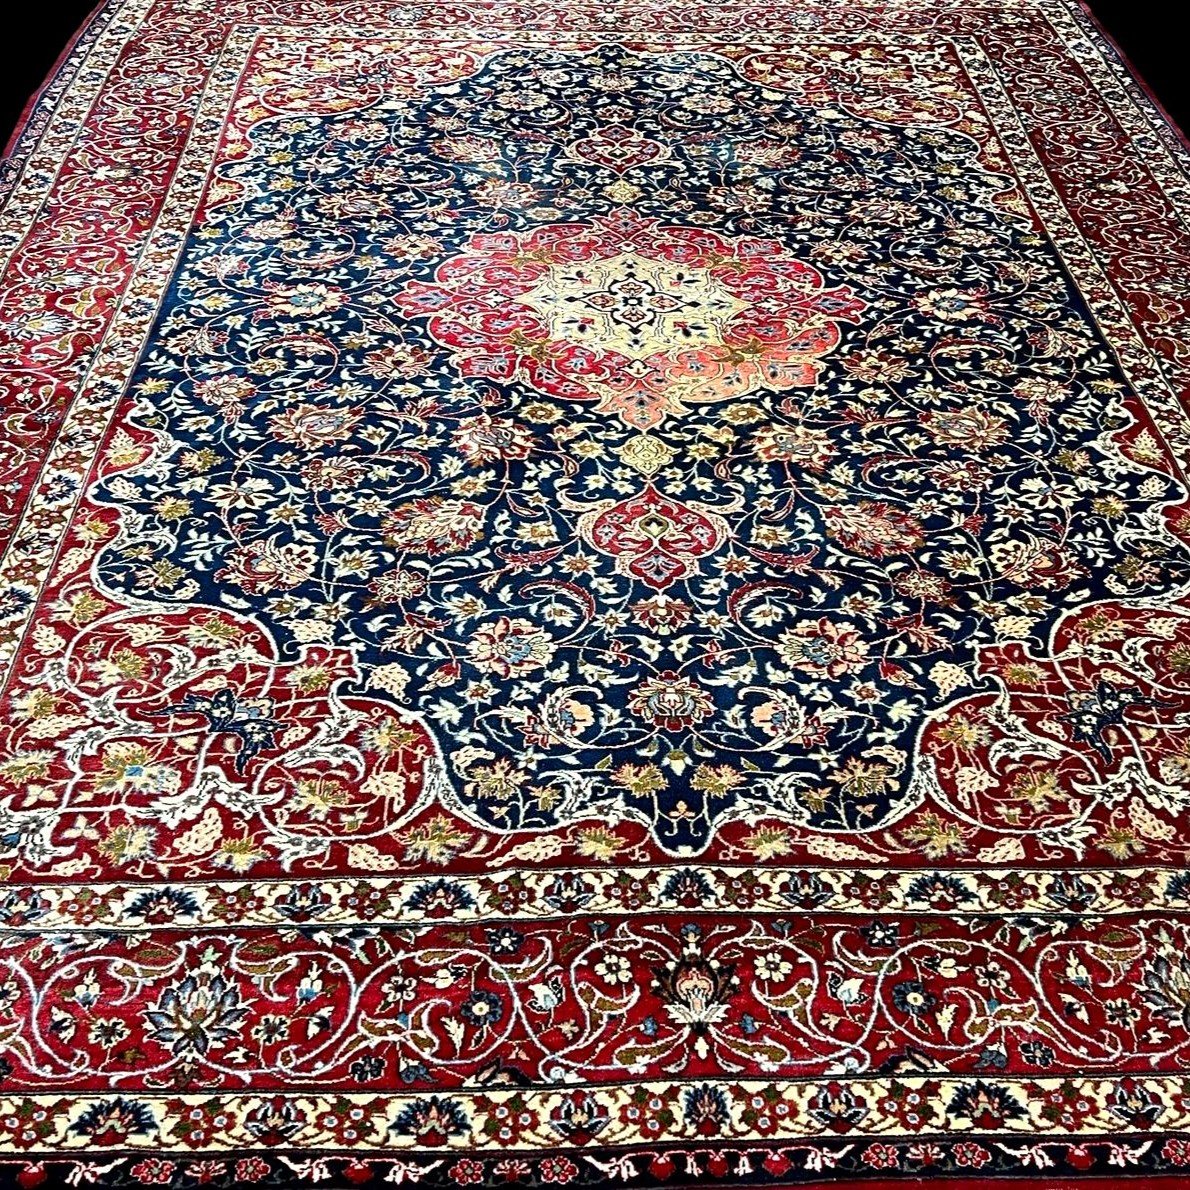 Important Isfahan Rug, 298 Cm X 384 Cm, Hand-knotted Kork Wool In Iran, Persia Circa 1950-1960